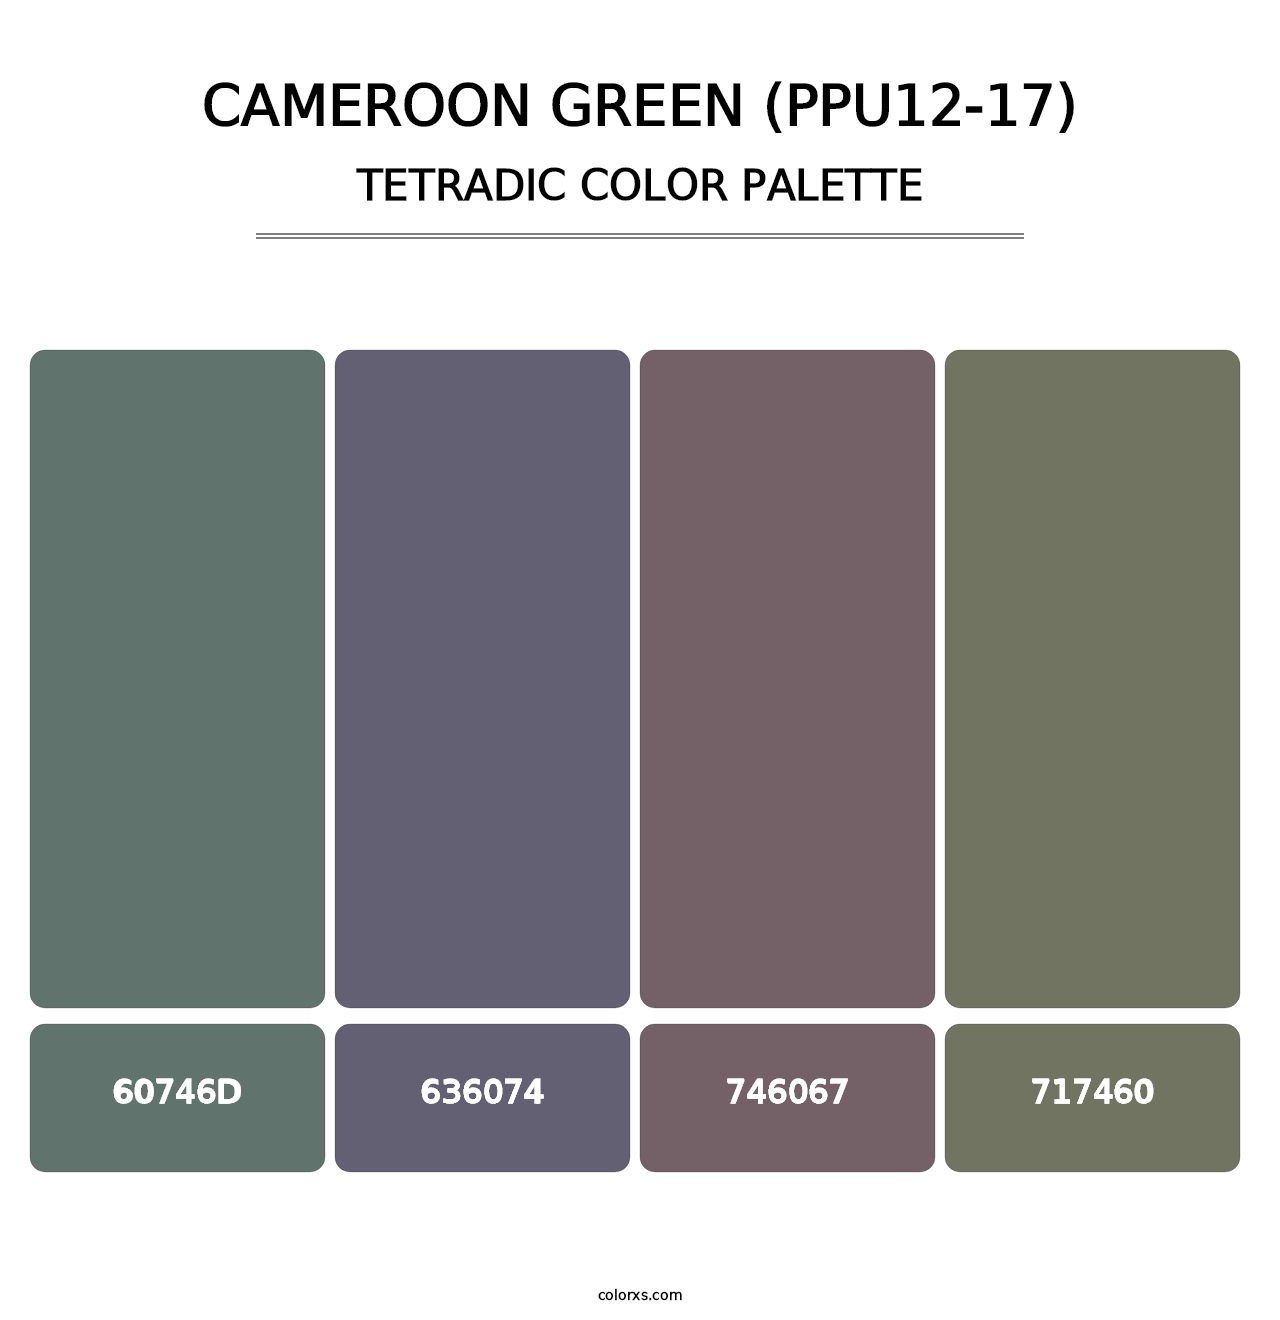 Cameroon Green (PPU12-17) - Tetradic Color Palette